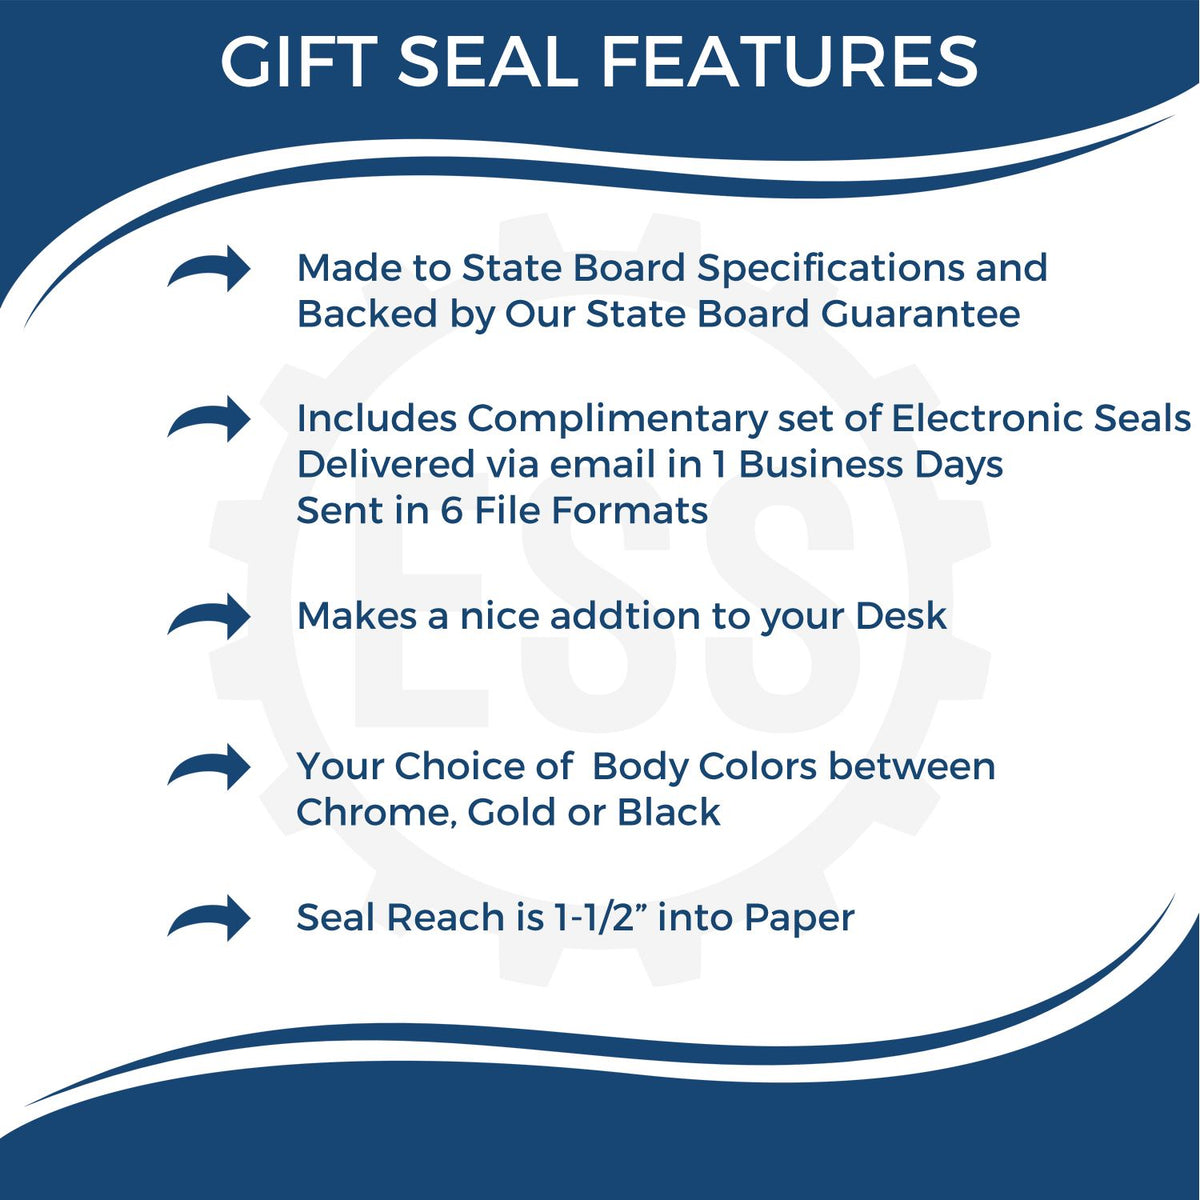 A picture of an infographic highlighting the selling points for the Gift Utah Land Surveyor Seal